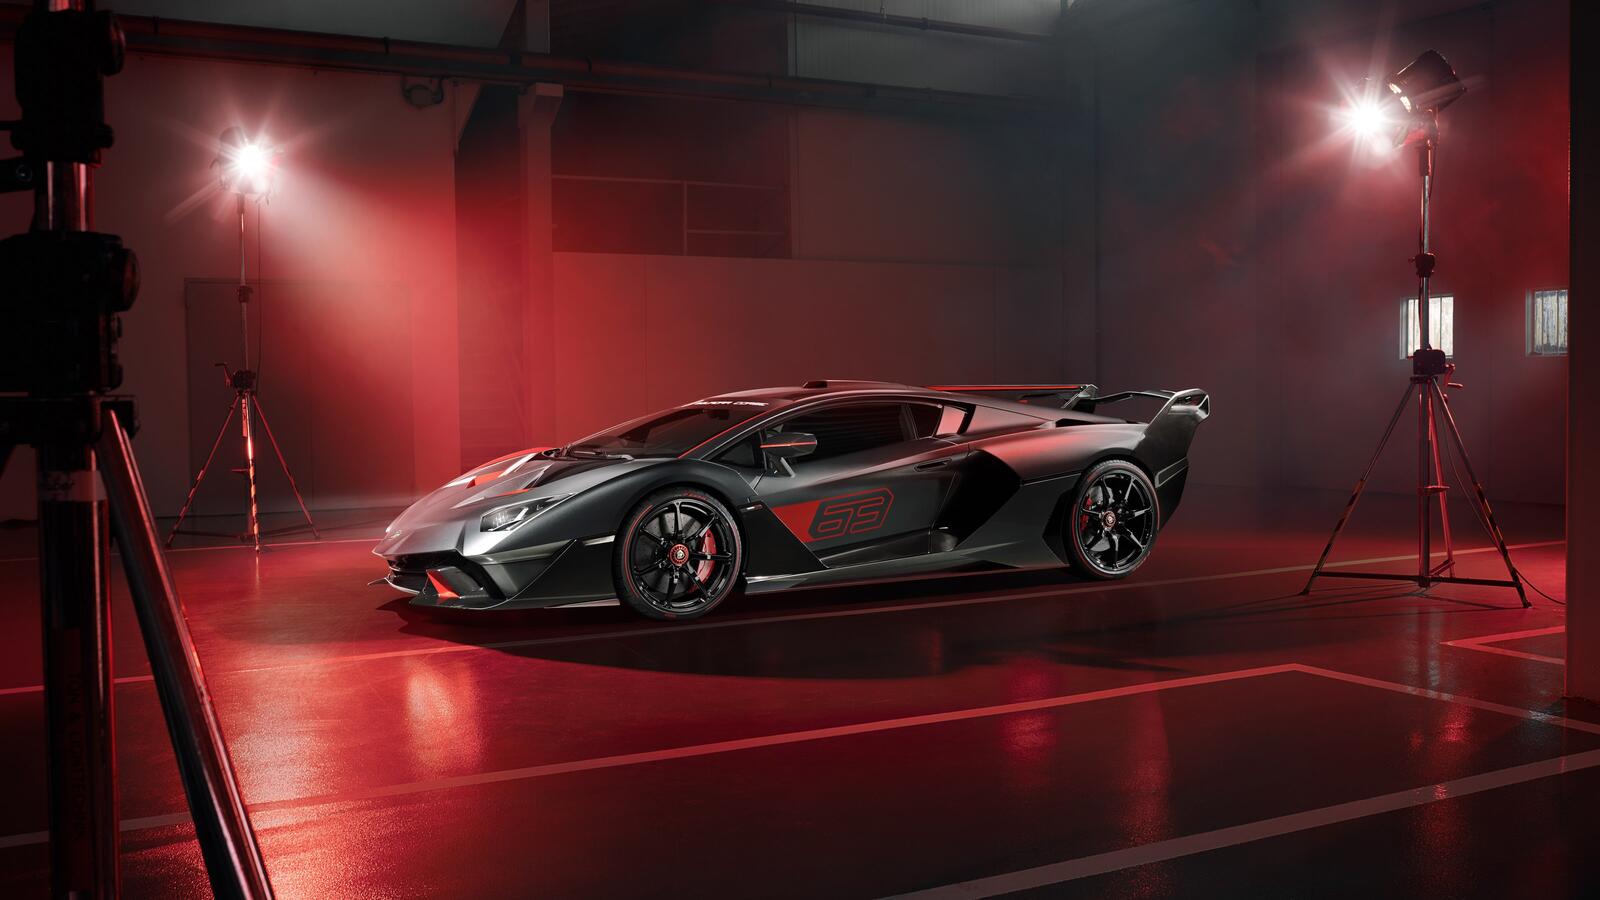 Free photo Lamborghini sc18 is standing indoors under red lights.